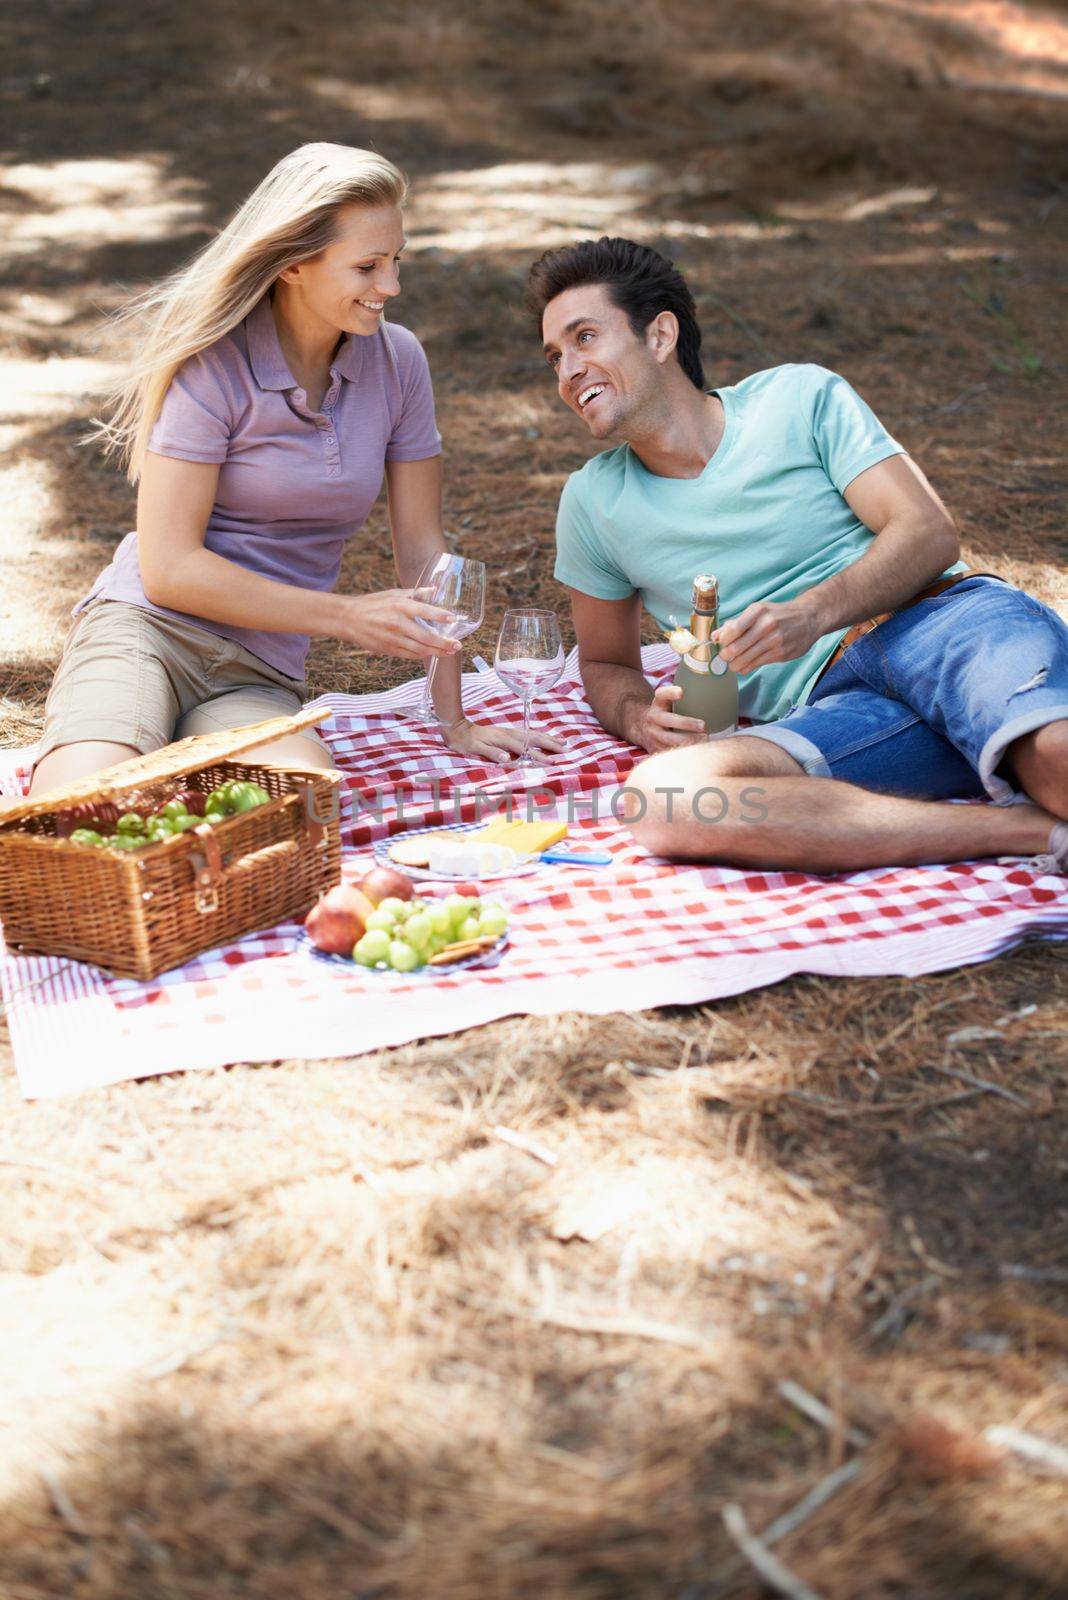 Nothing beats a romantic picnic. View of a happy young couple enjoying a romantic picnic in the woods